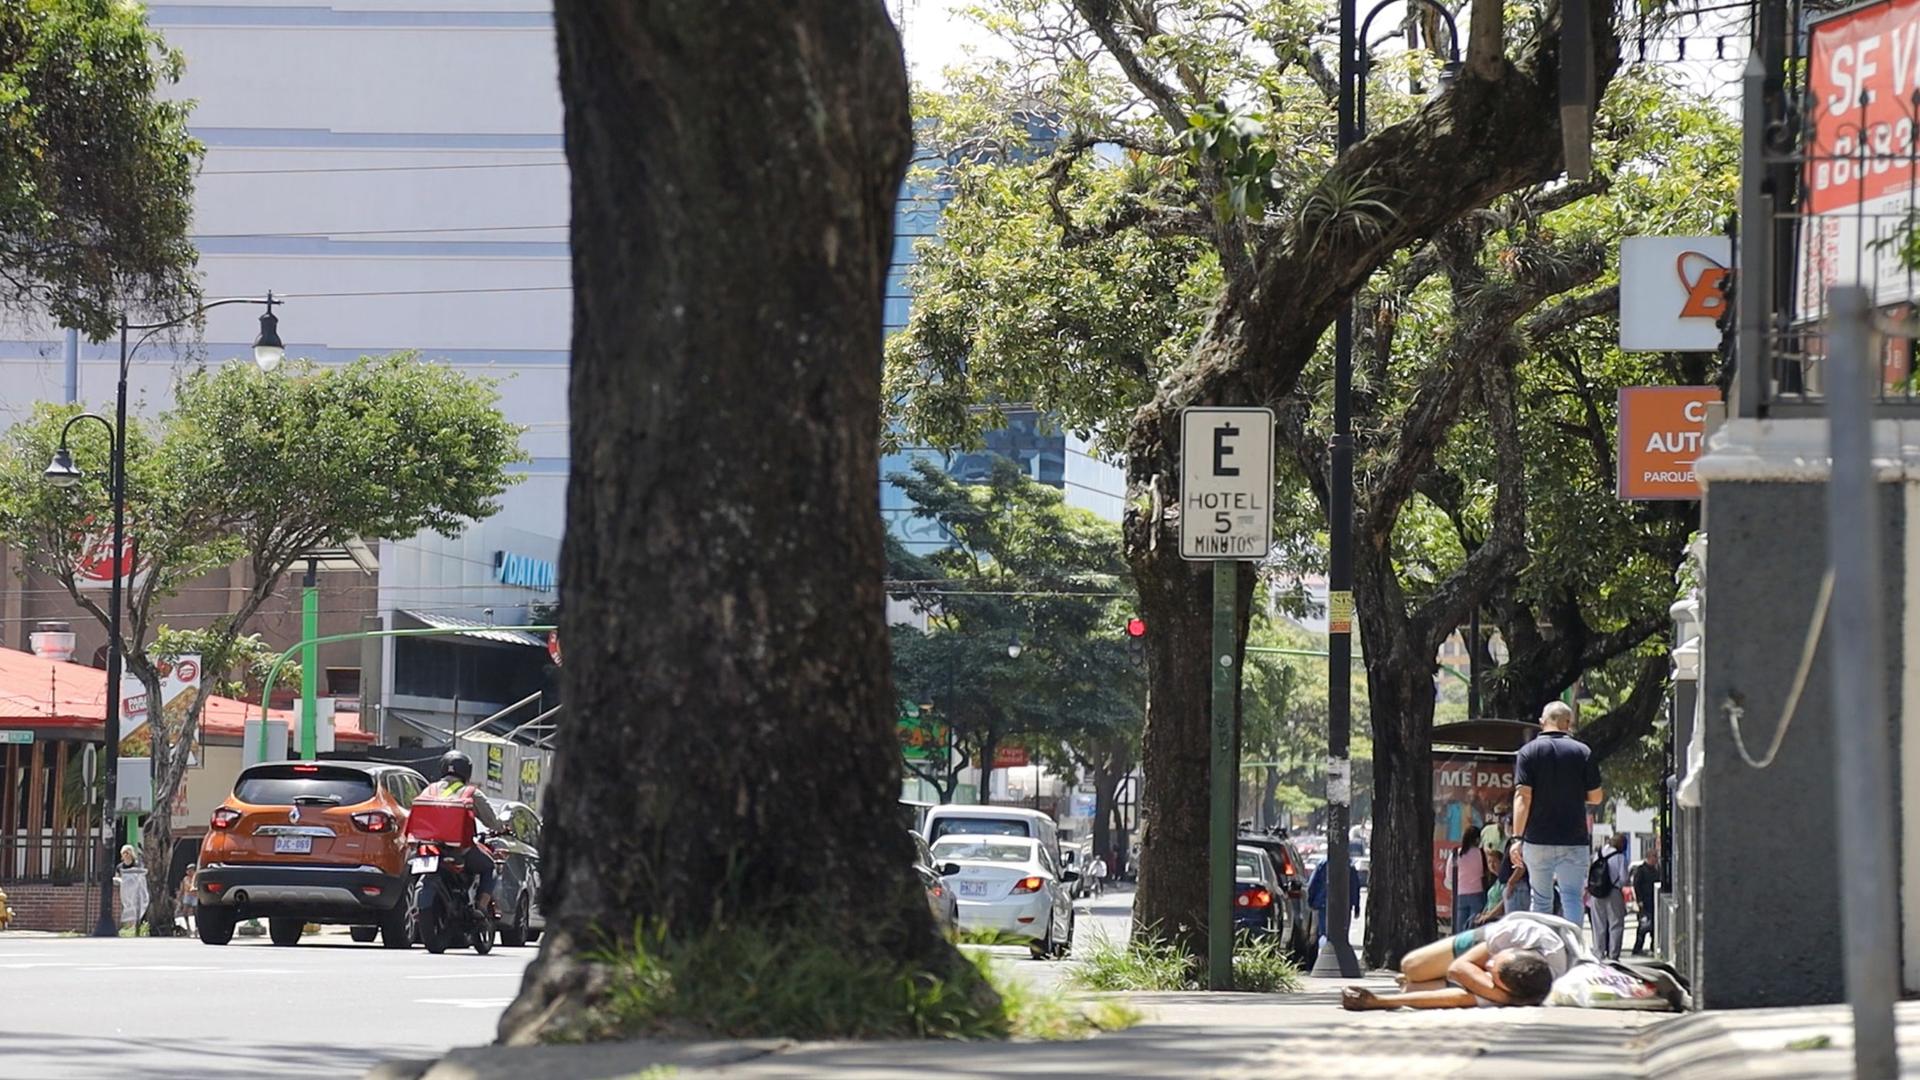 Rising poverty, unemployment, and inflation have plagued Costa Rica. Every few blocks, a person is passed out or sleeping on the street.